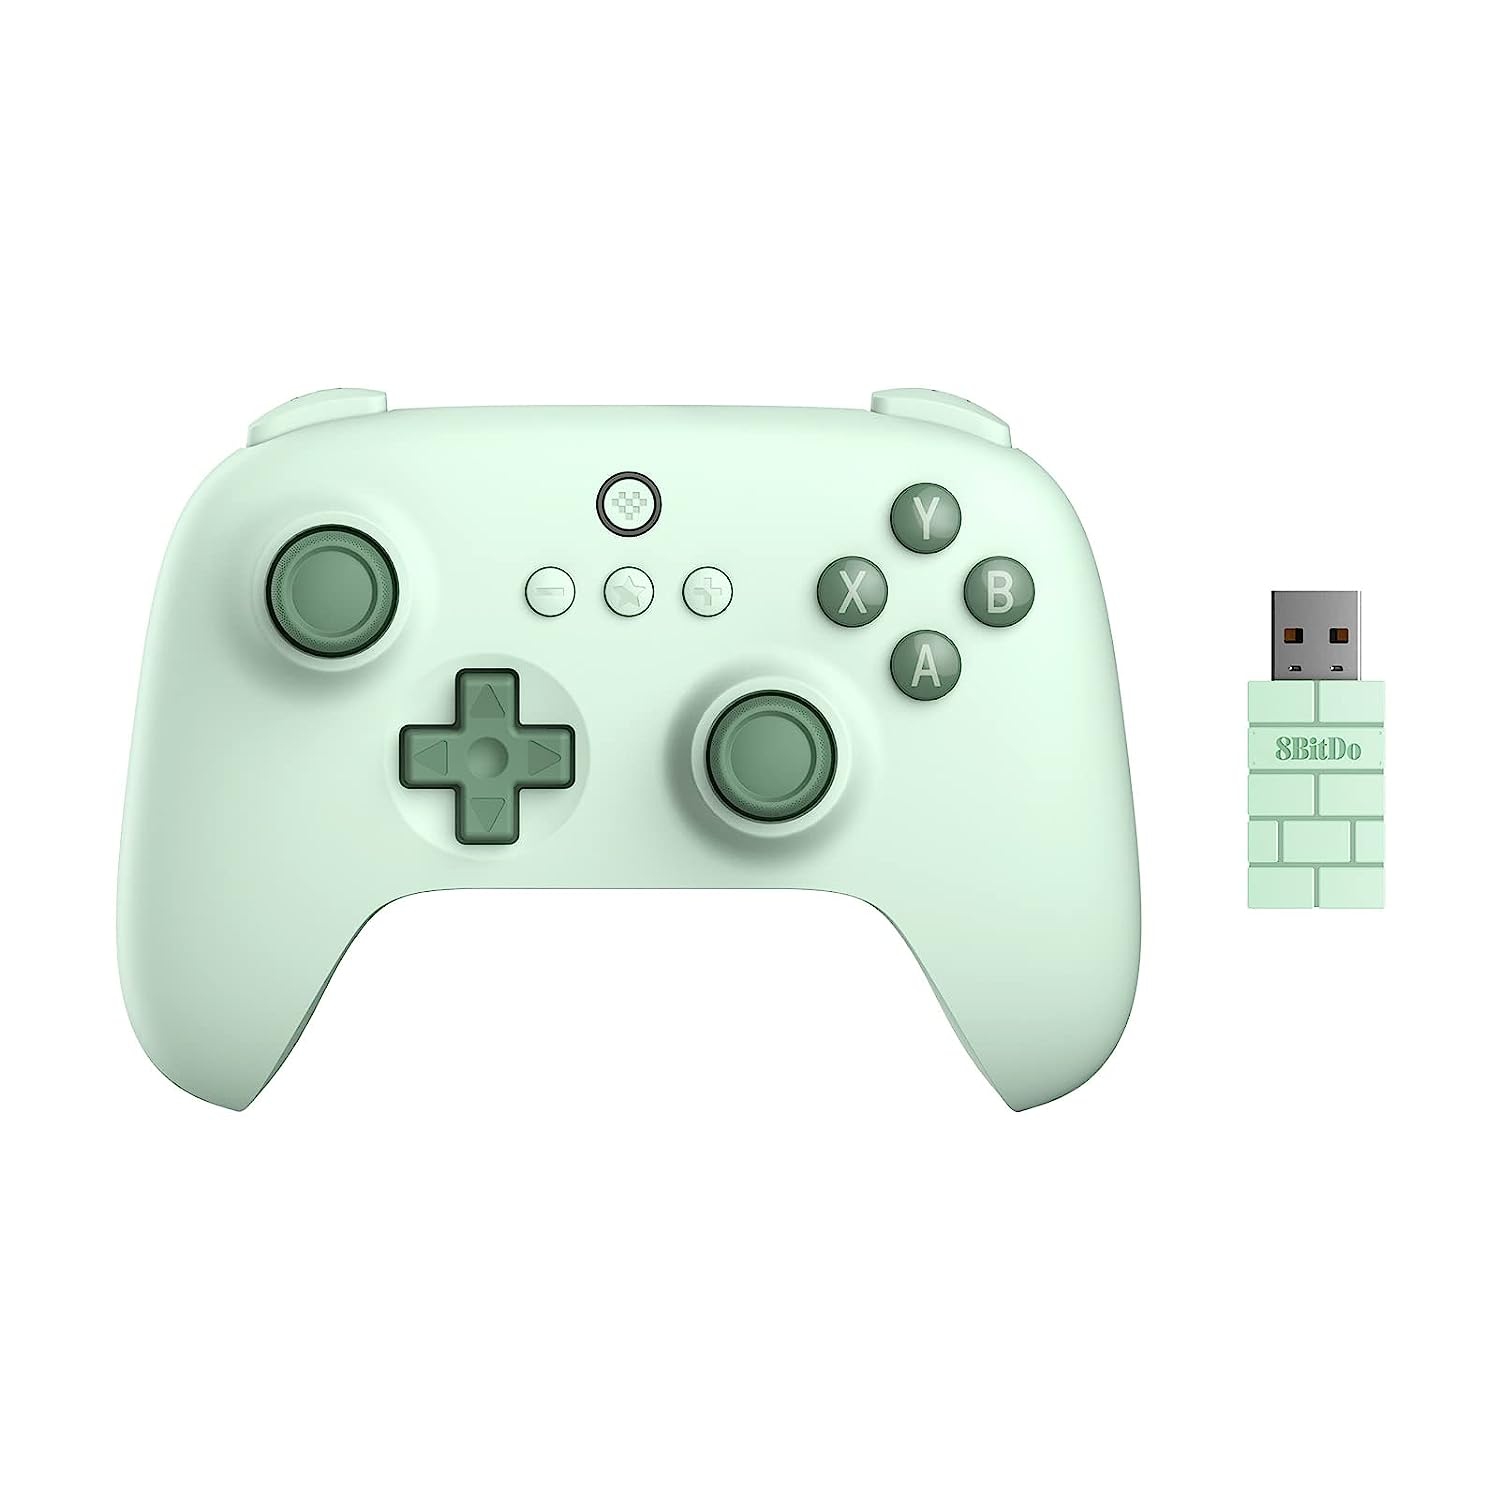 8Bitdo Ultimate C 2.4G Wireless Game Controller for PC, Android, Steam Deck - Field Green